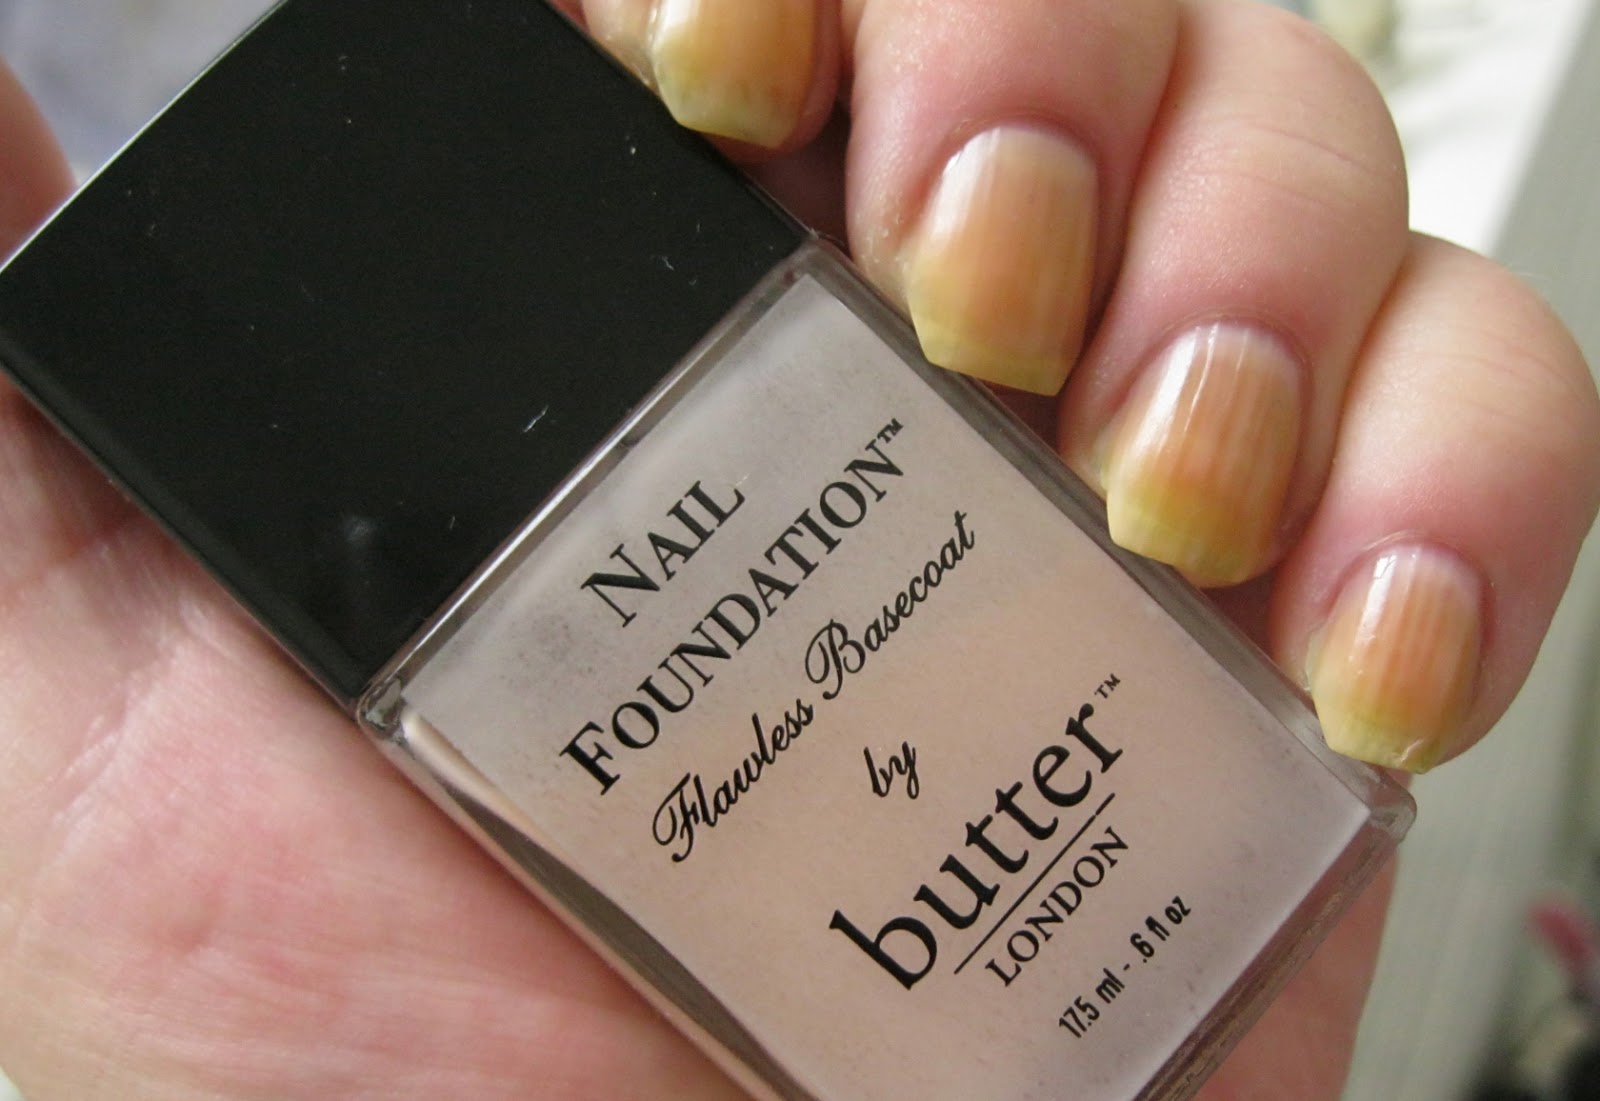 7. Butter London Nail Lacquer in "Molly Coddled" - wide 8